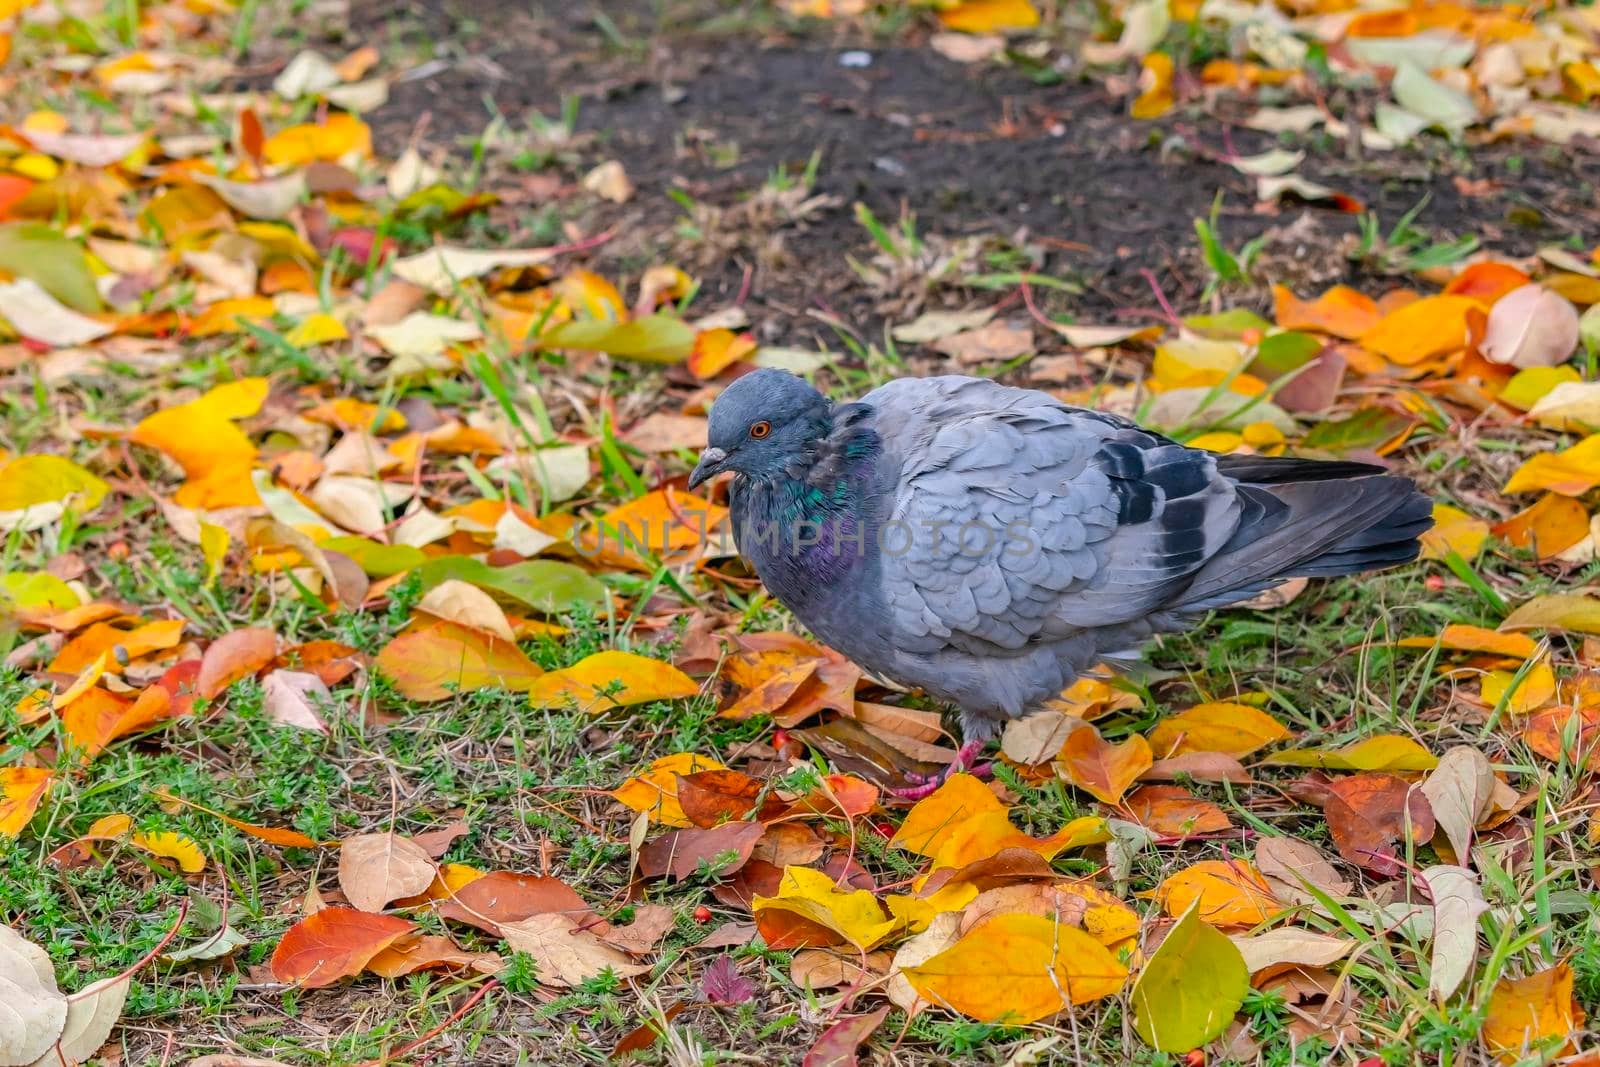 Lonely dove looking for food surrounded by autumn foliage by Skaron